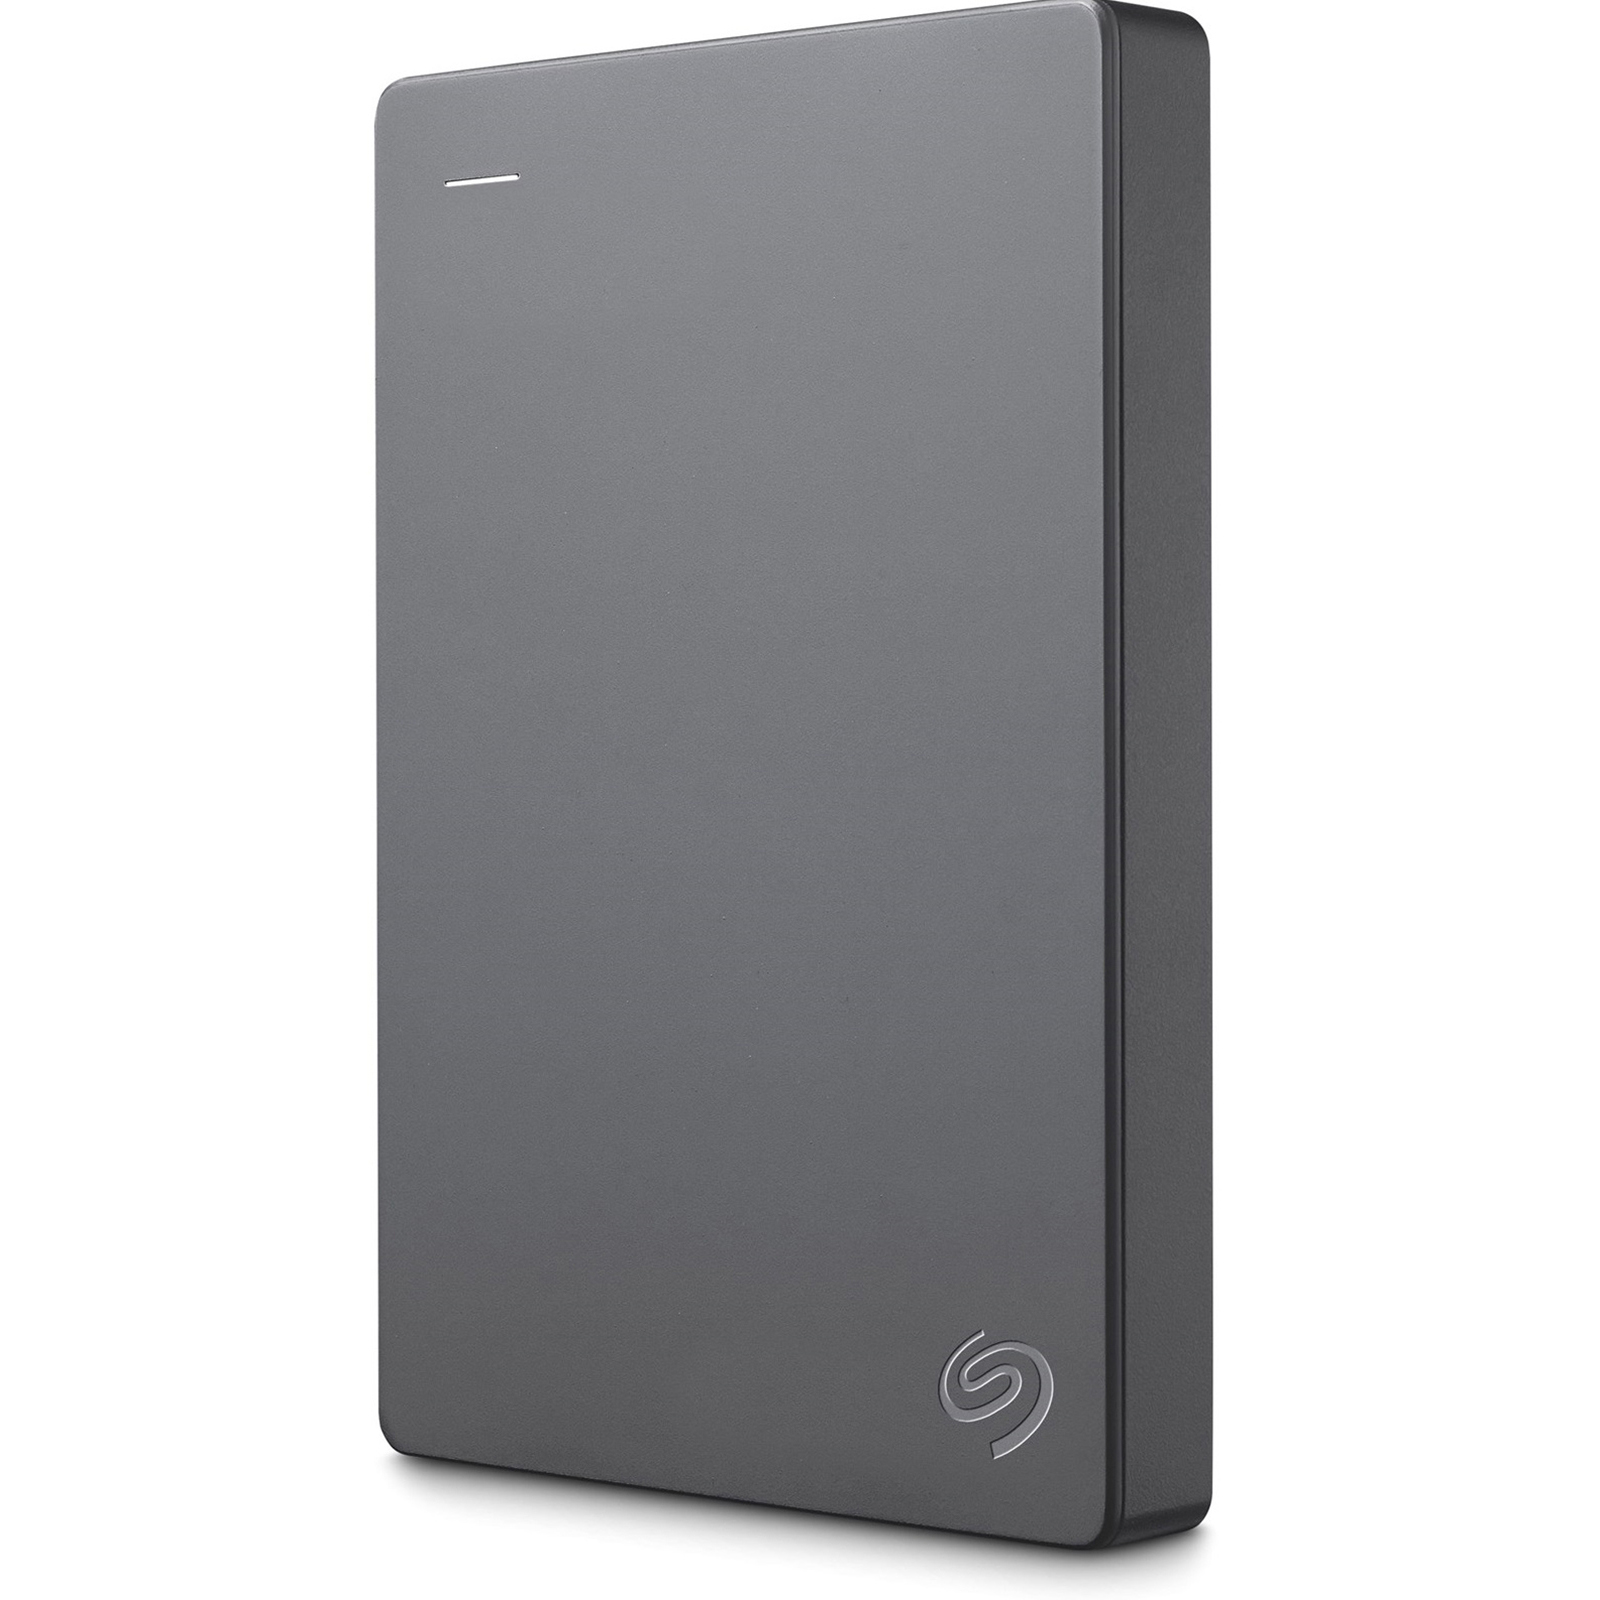 SEAGATE - Disque dur externe Gaming - 4 To - USB 3.0 (STEA4000407